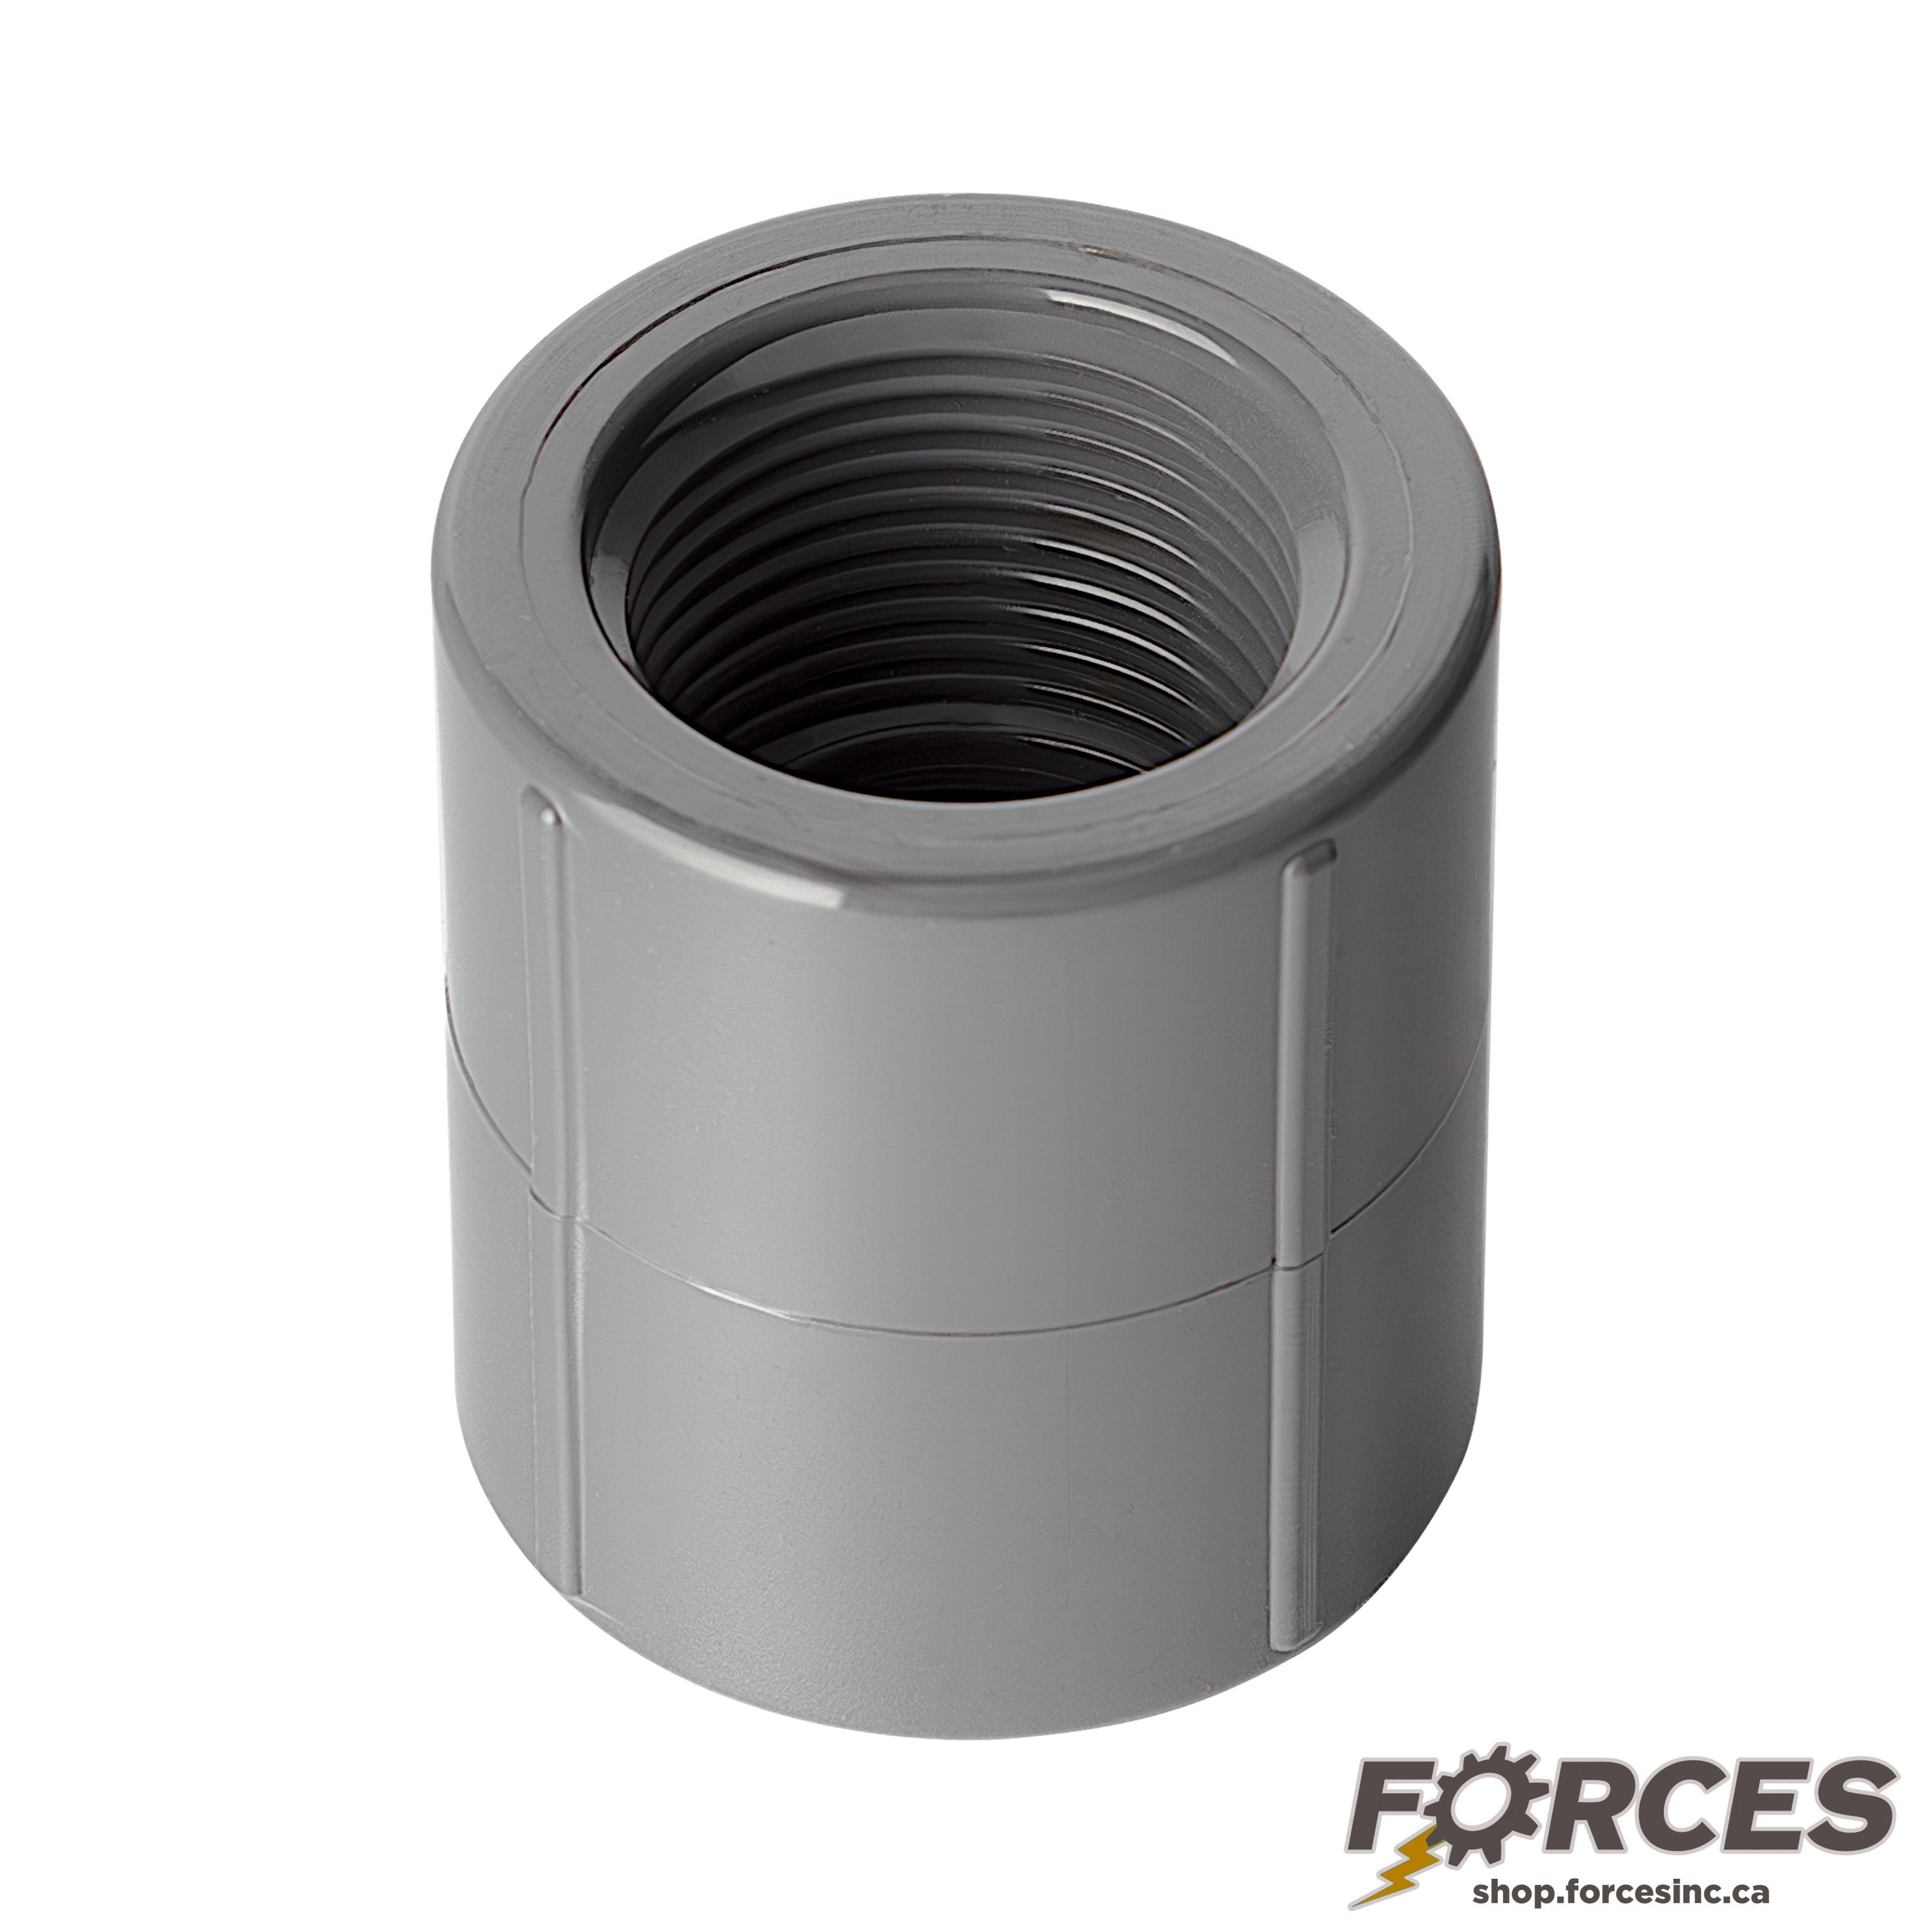 2-1/2" Coupling (Threaded) Sch 80 - PVC Grey | 830025 - Forces Inc